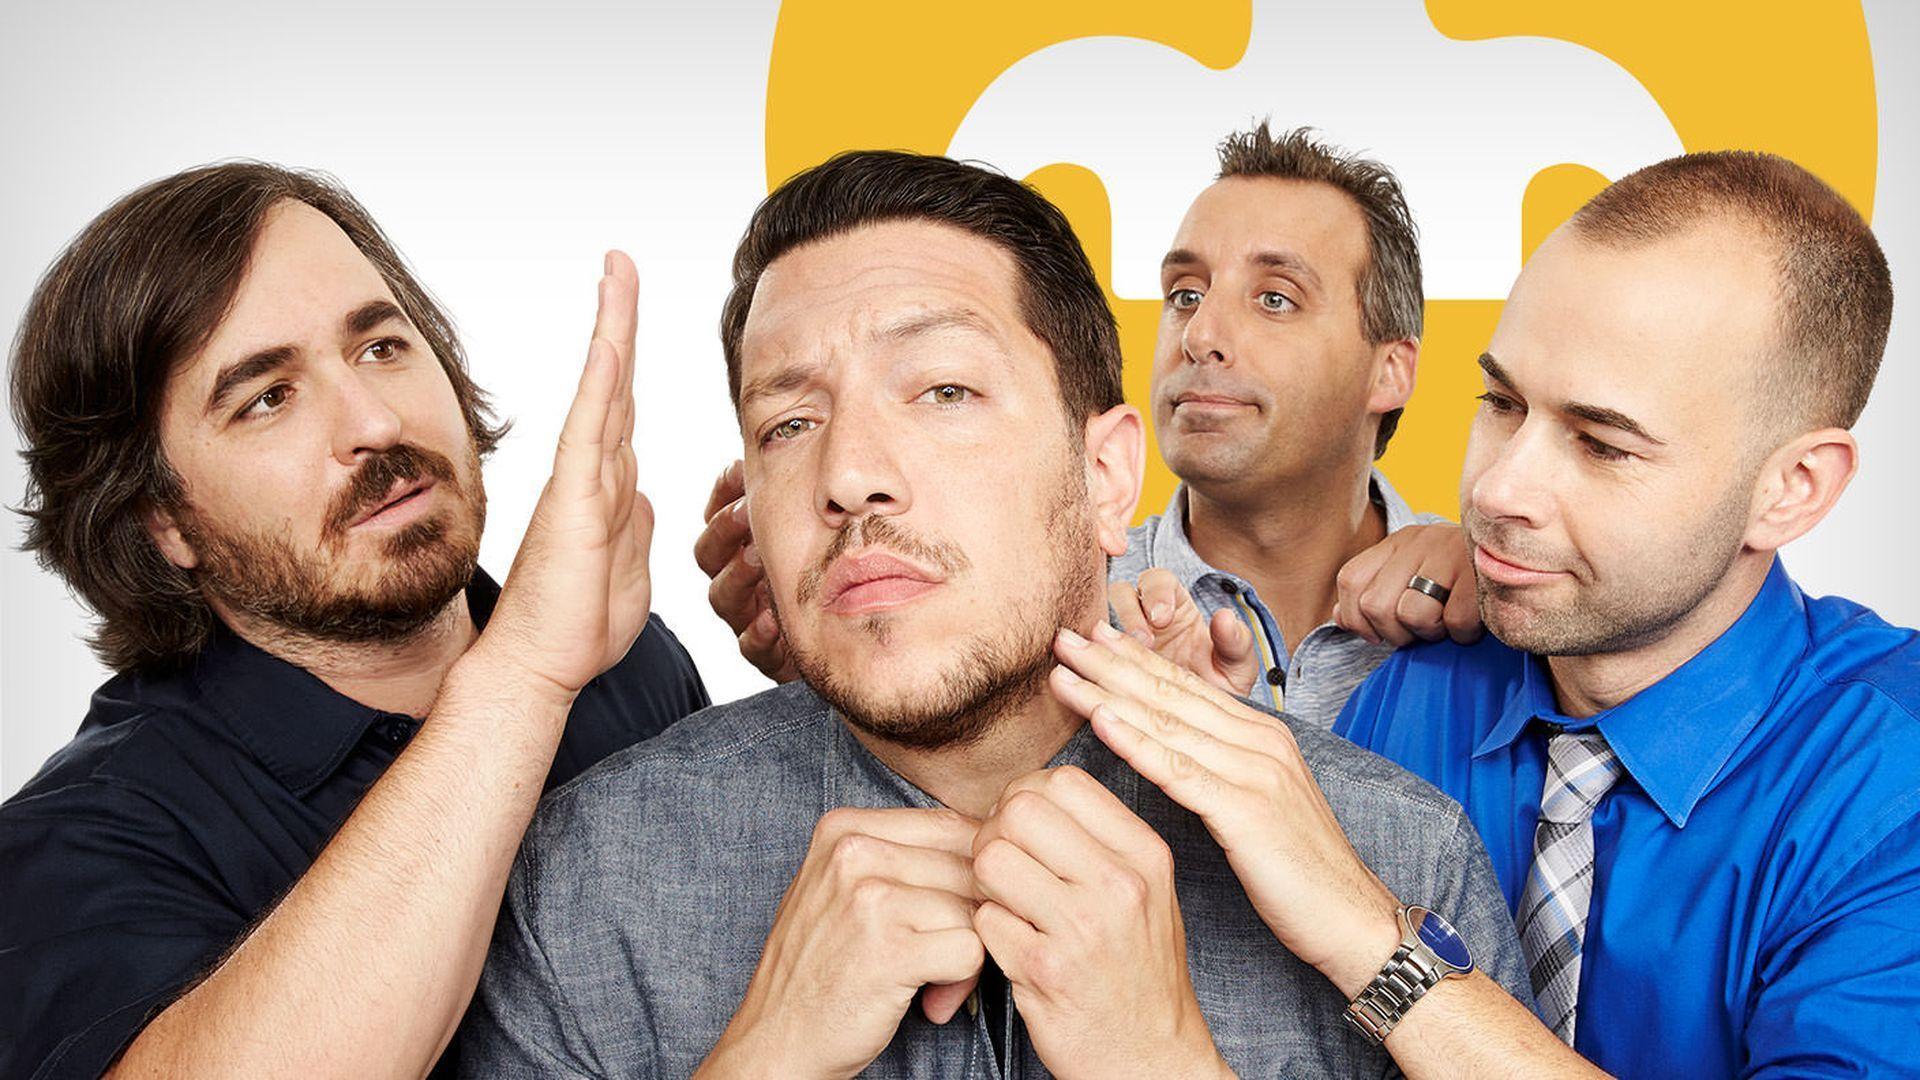 Could You Be One of the Impractical Jokers?